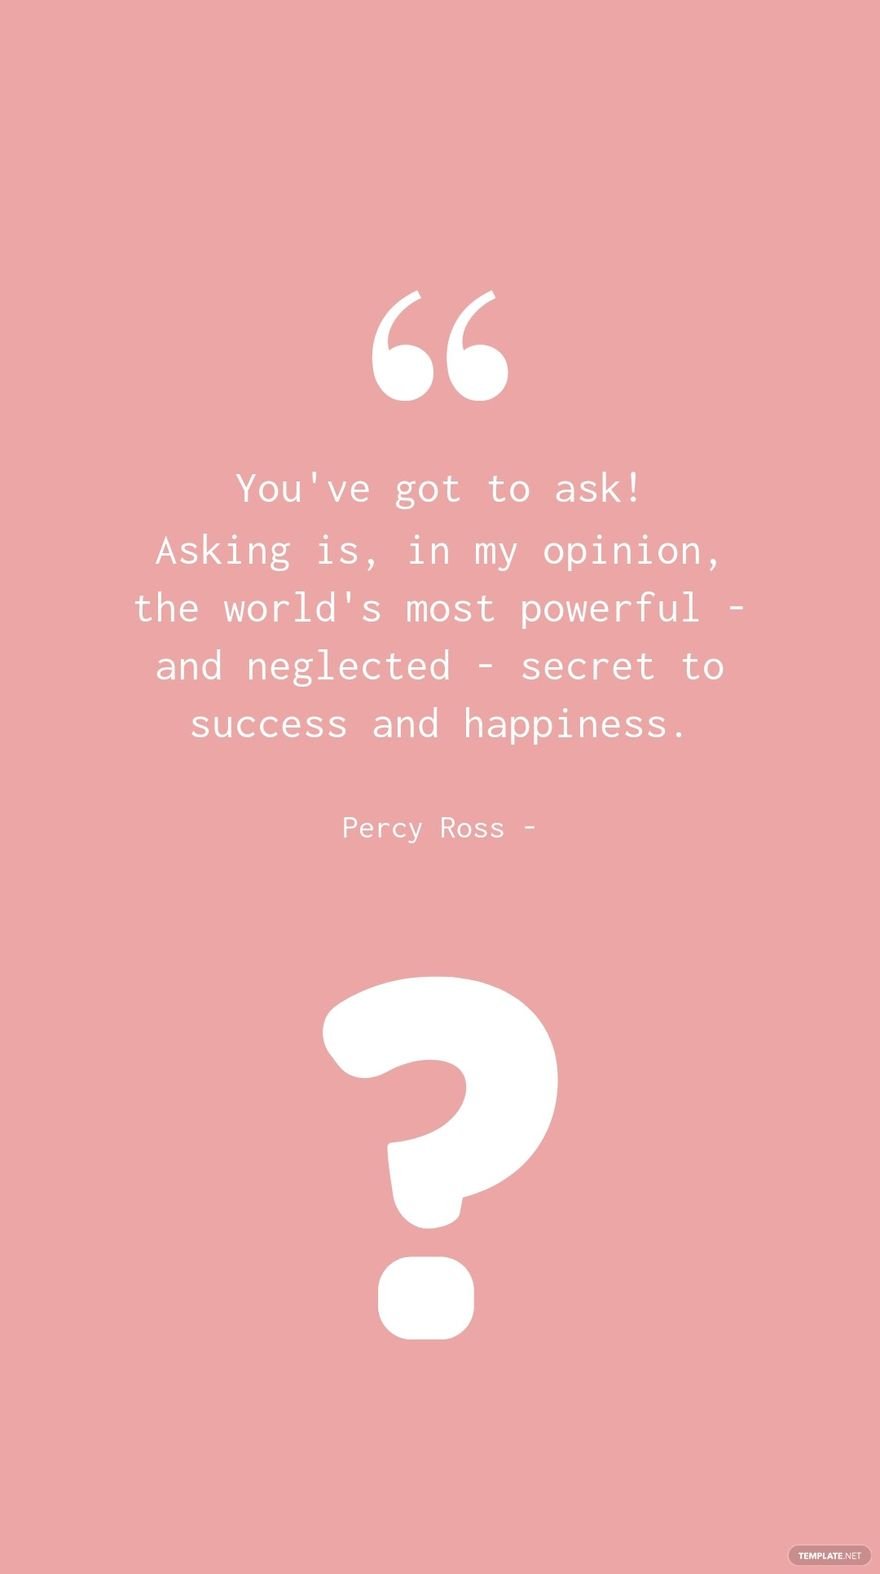 Free Percy Ross - You've got to ask! Asking is, in my opinion, the world's most powerful - and neglected - secret to success and happiness. in JPG